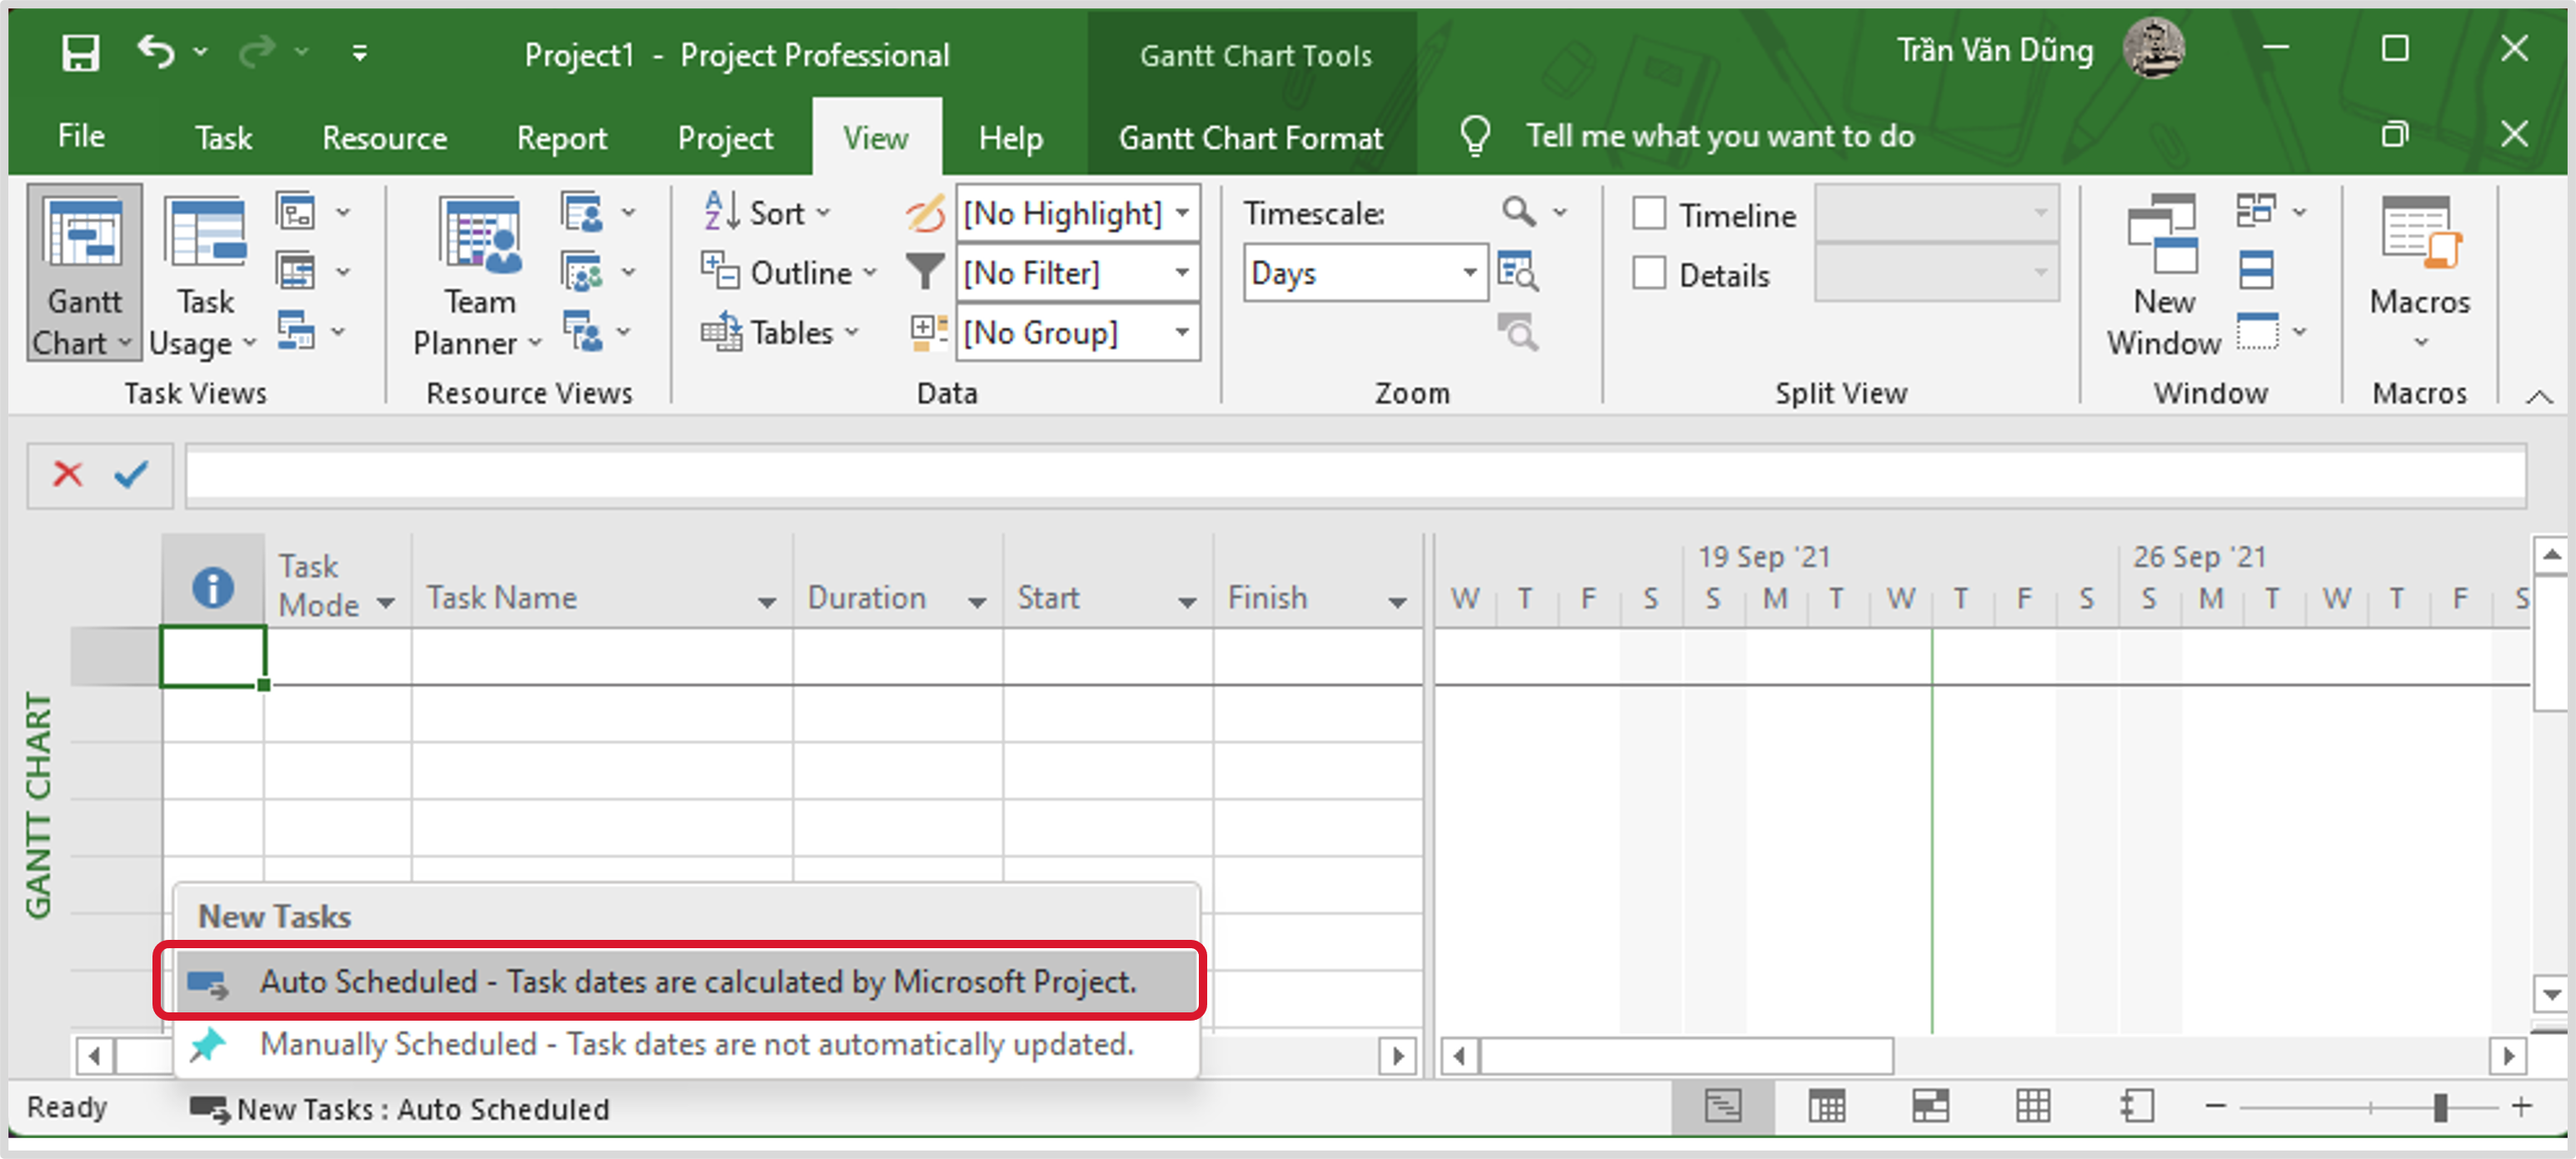 auto-scheduled-new-task-ms-project